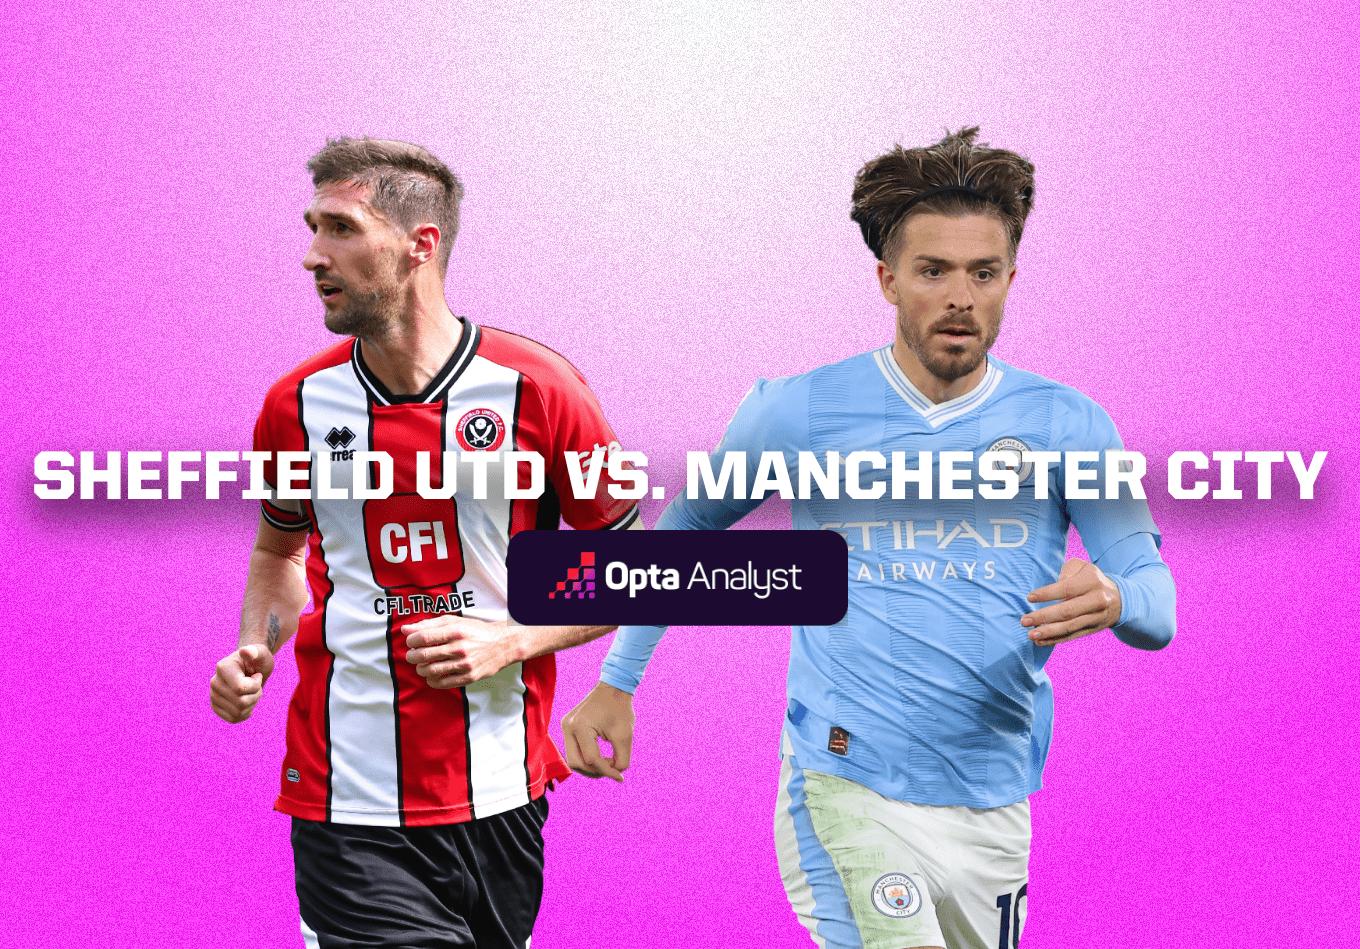 Sheffield United vs Manchester City: Prediction and Preview